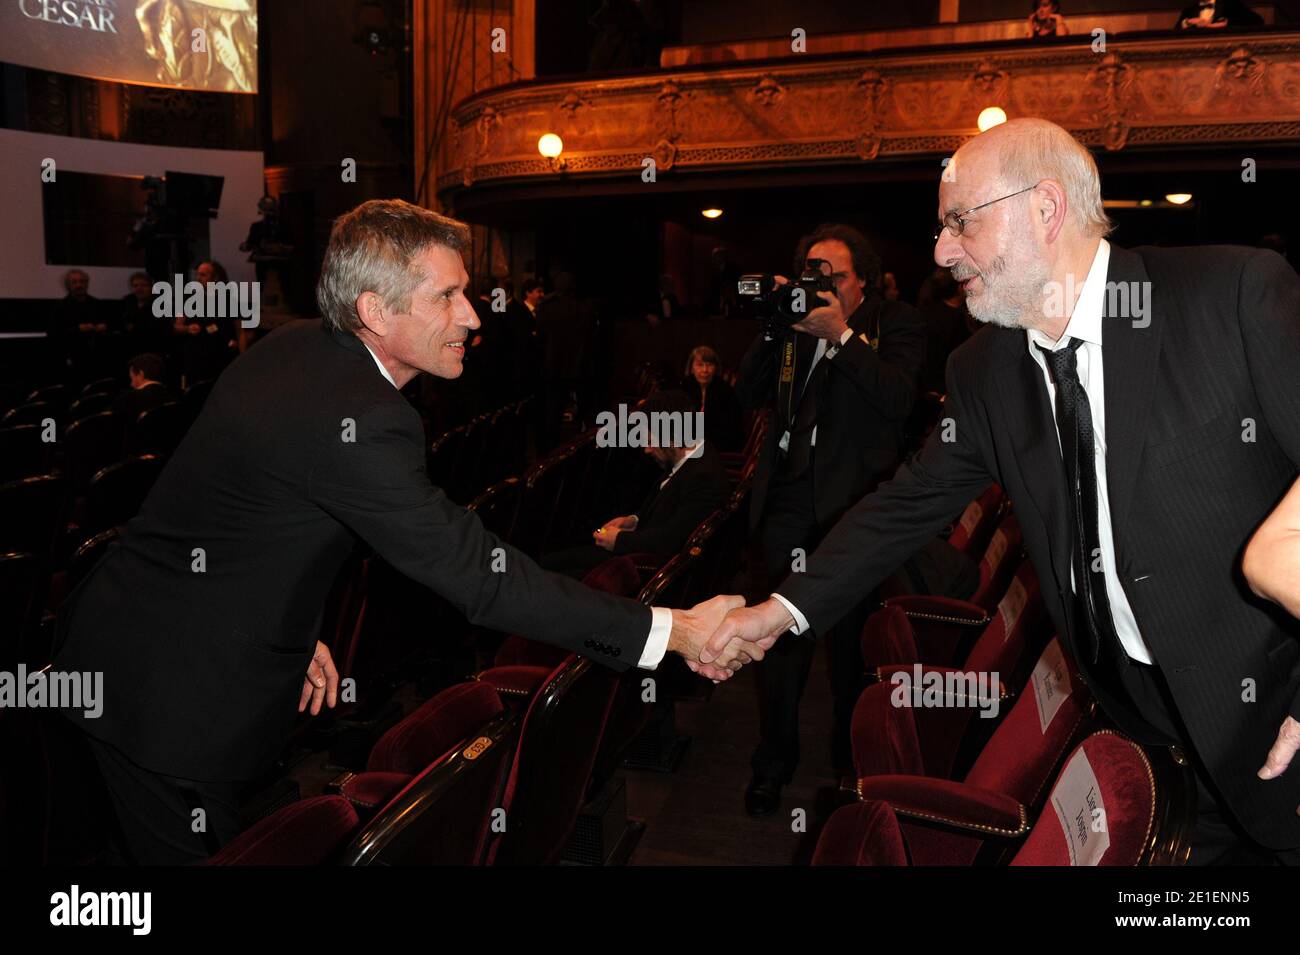 Jacques Gamblin and Bertrand Blier during the 36th Cesar Film Awards ceremony held at the Theatre du Chatelet in Paris, France on February 25, 2011. Photo by Nicolas Gouhier/ABACAPRESS.COM Stock Photo